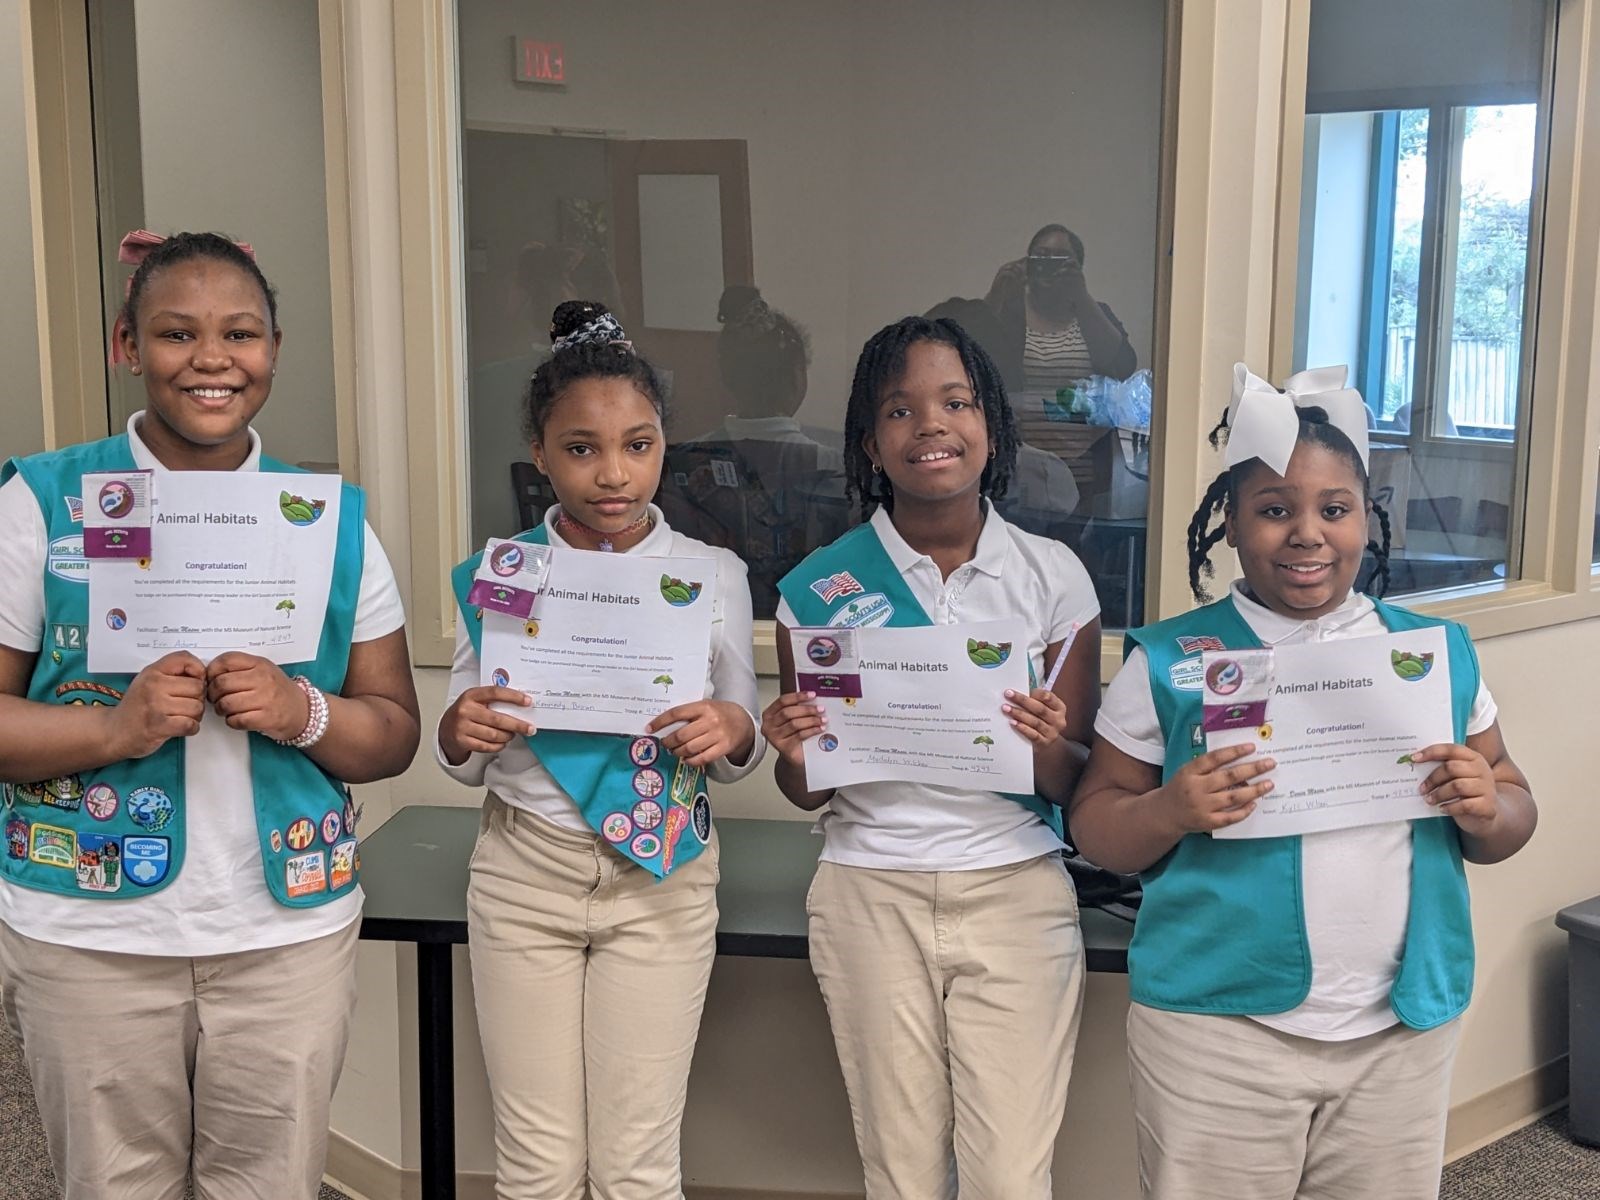 brownie girl scouts at mississippi museum of natural science